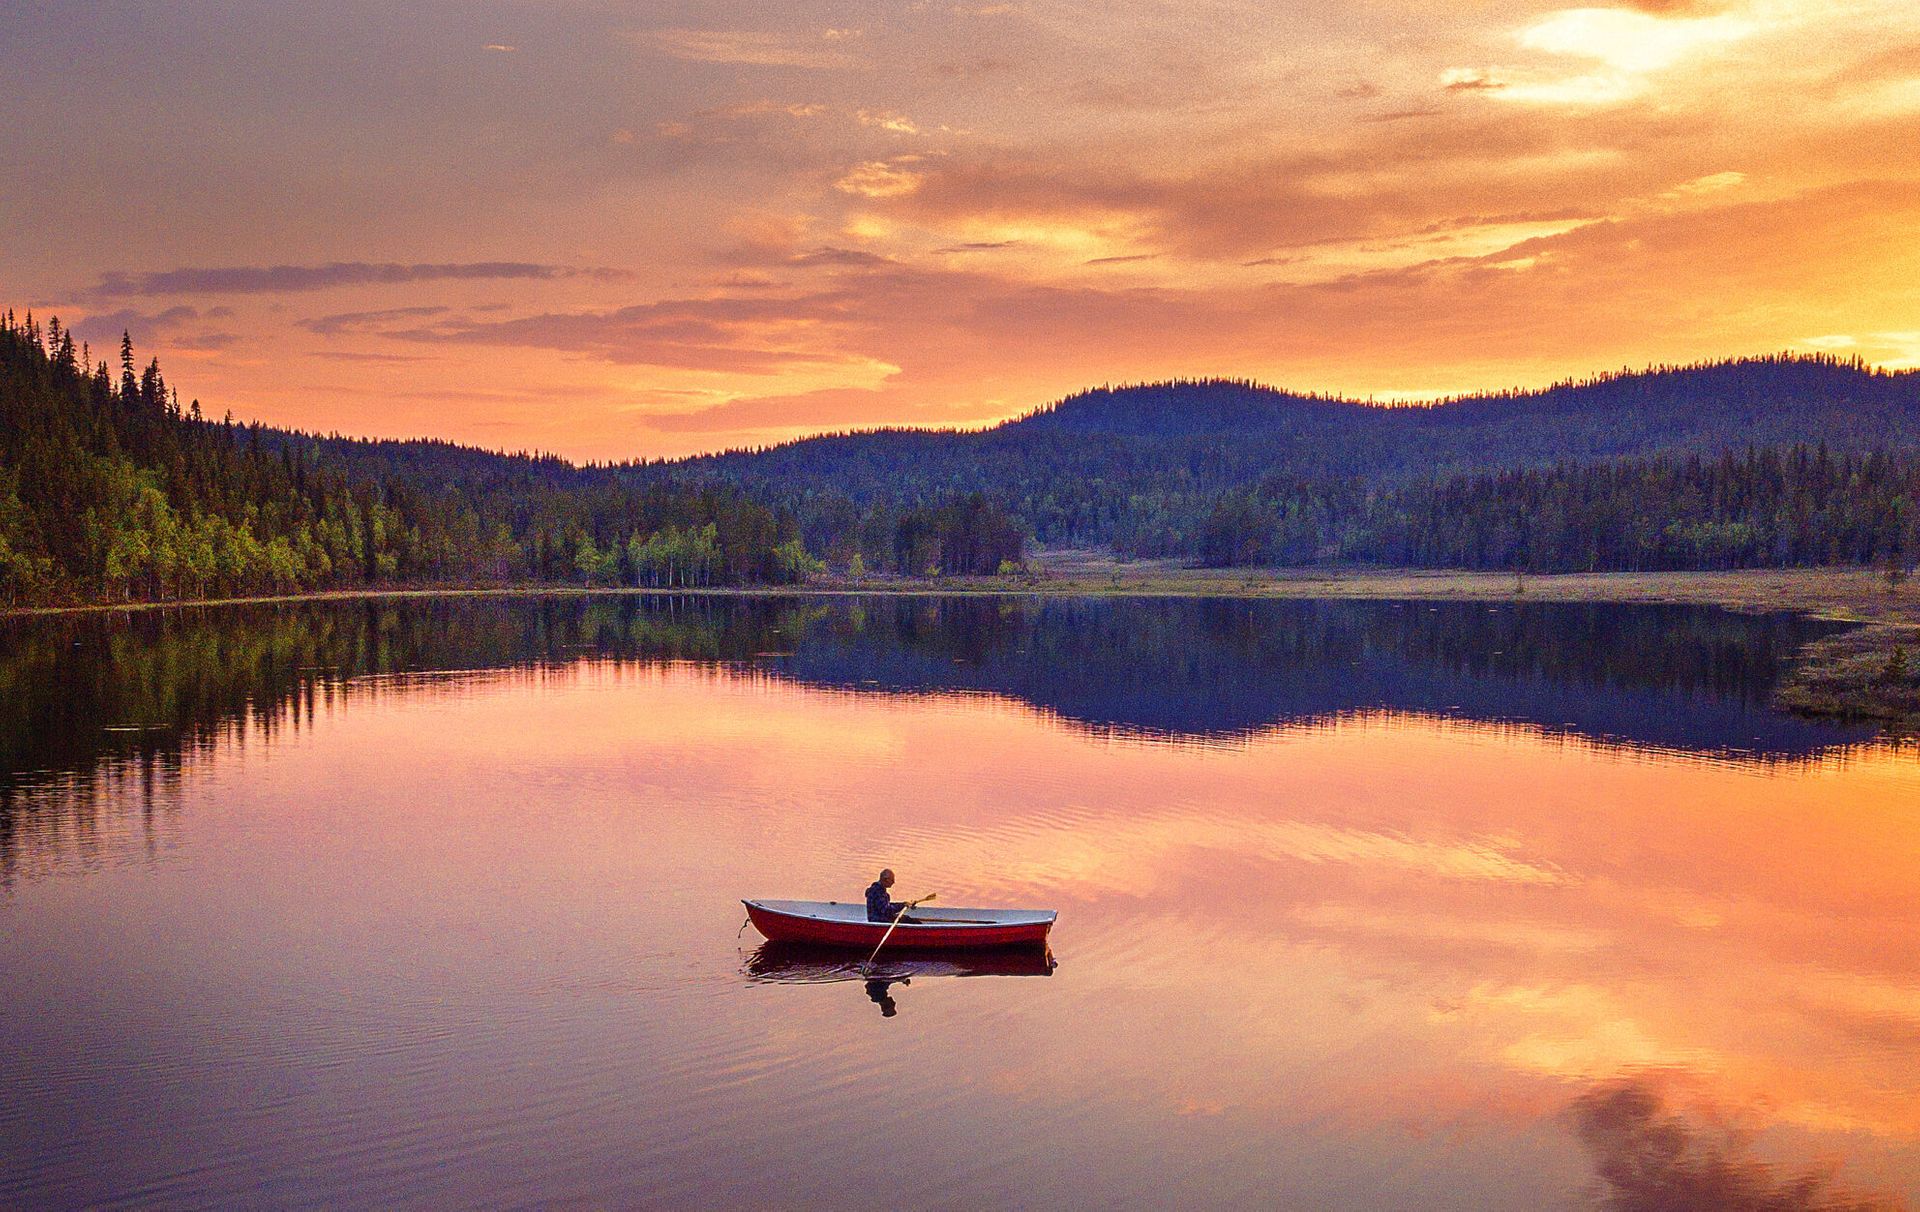 A person is rowing a boat on a mirrored lake under the midnight sun in Swedish Lapland.